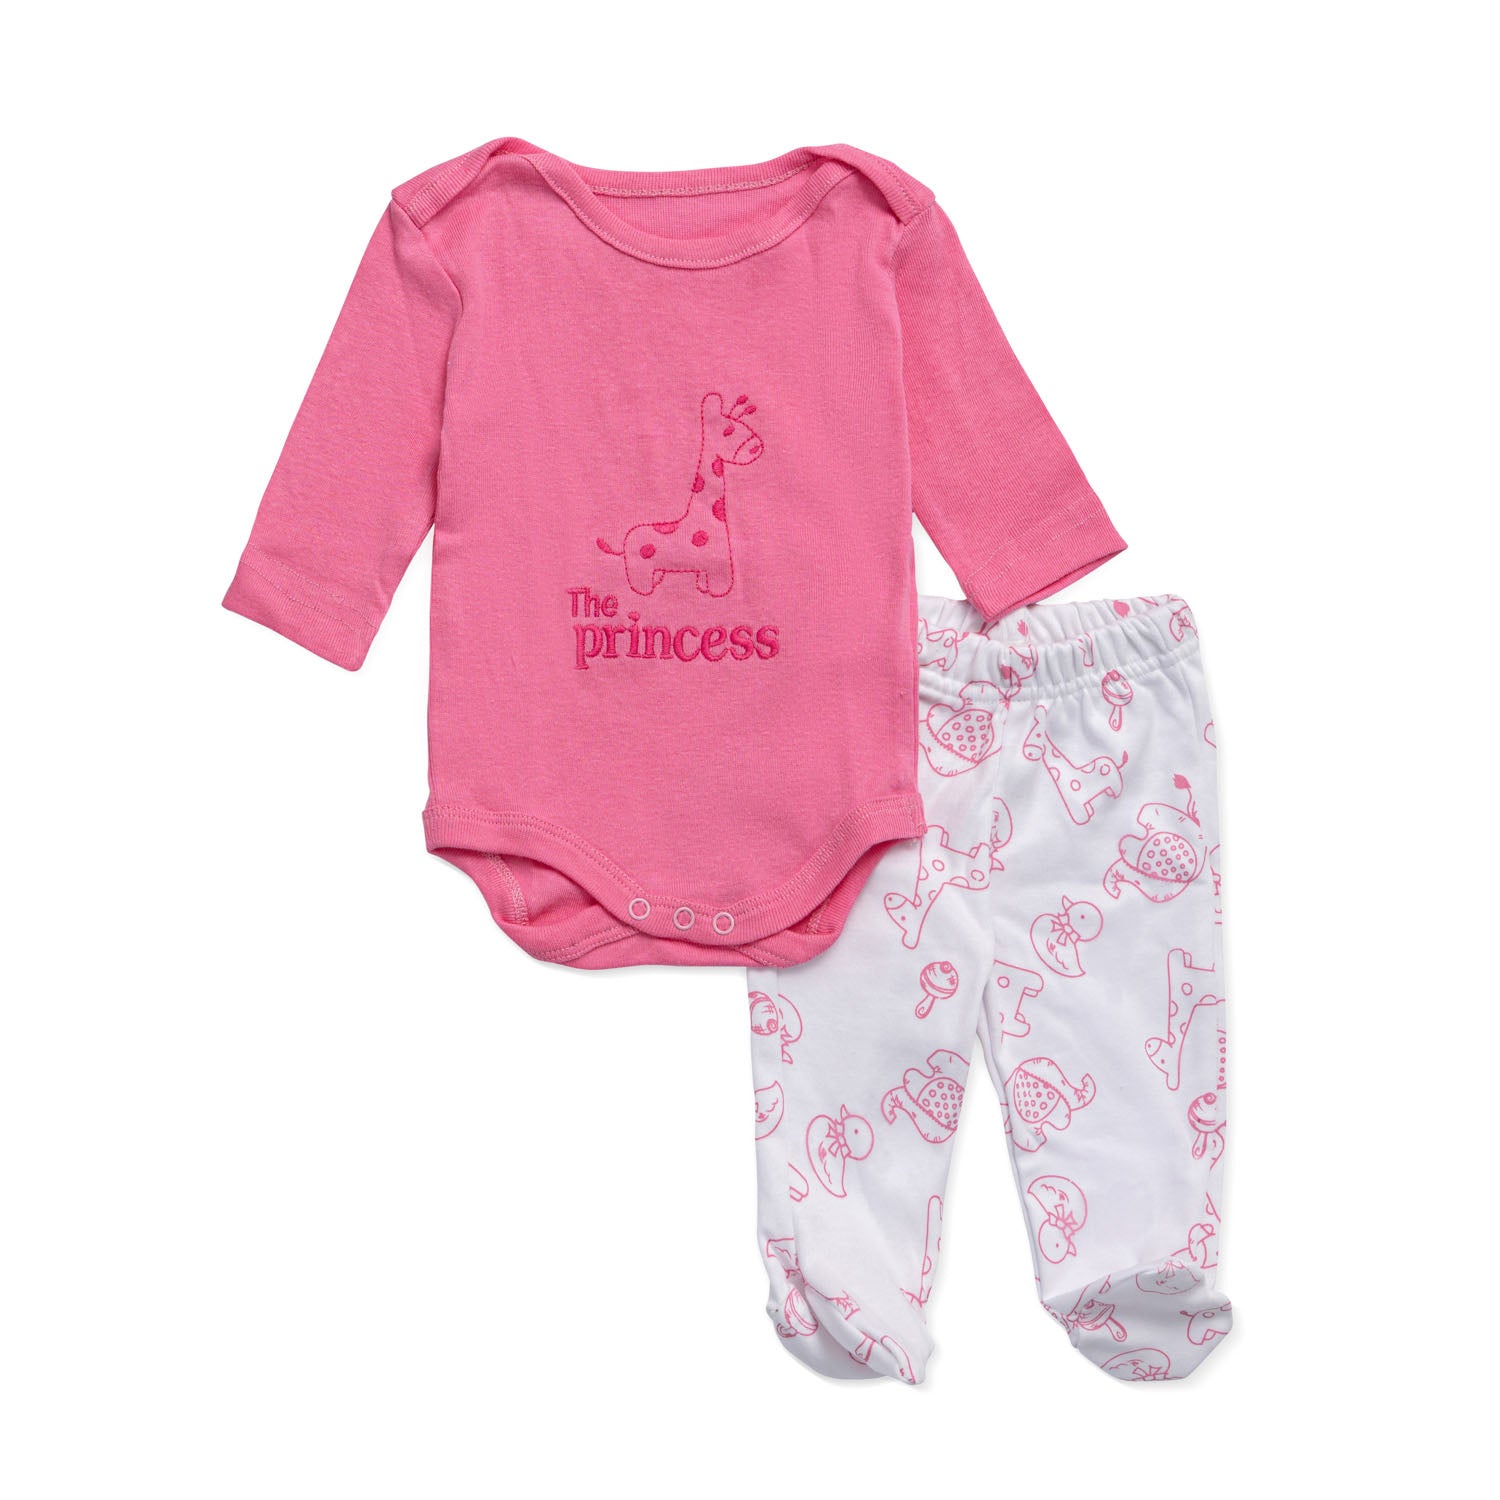 pink salopette with princess and animal pattern embroidery and white pants with pink animal pattern embroidery